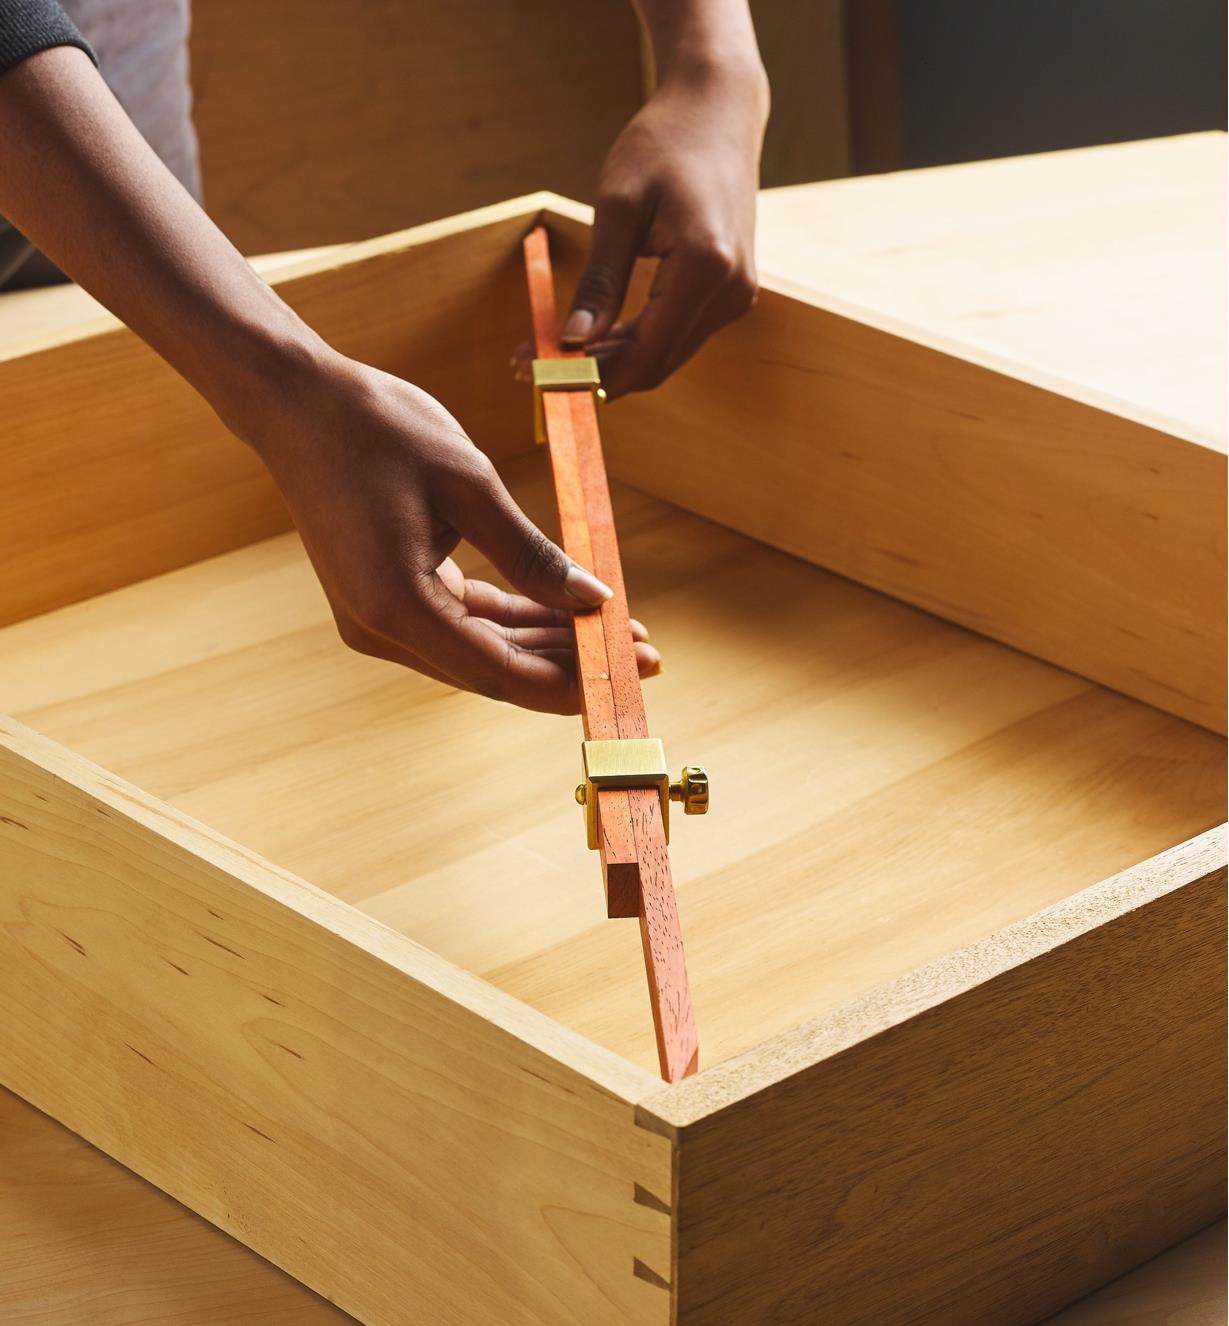 Crucible pinch rods used to measure inside corners of a wooden box